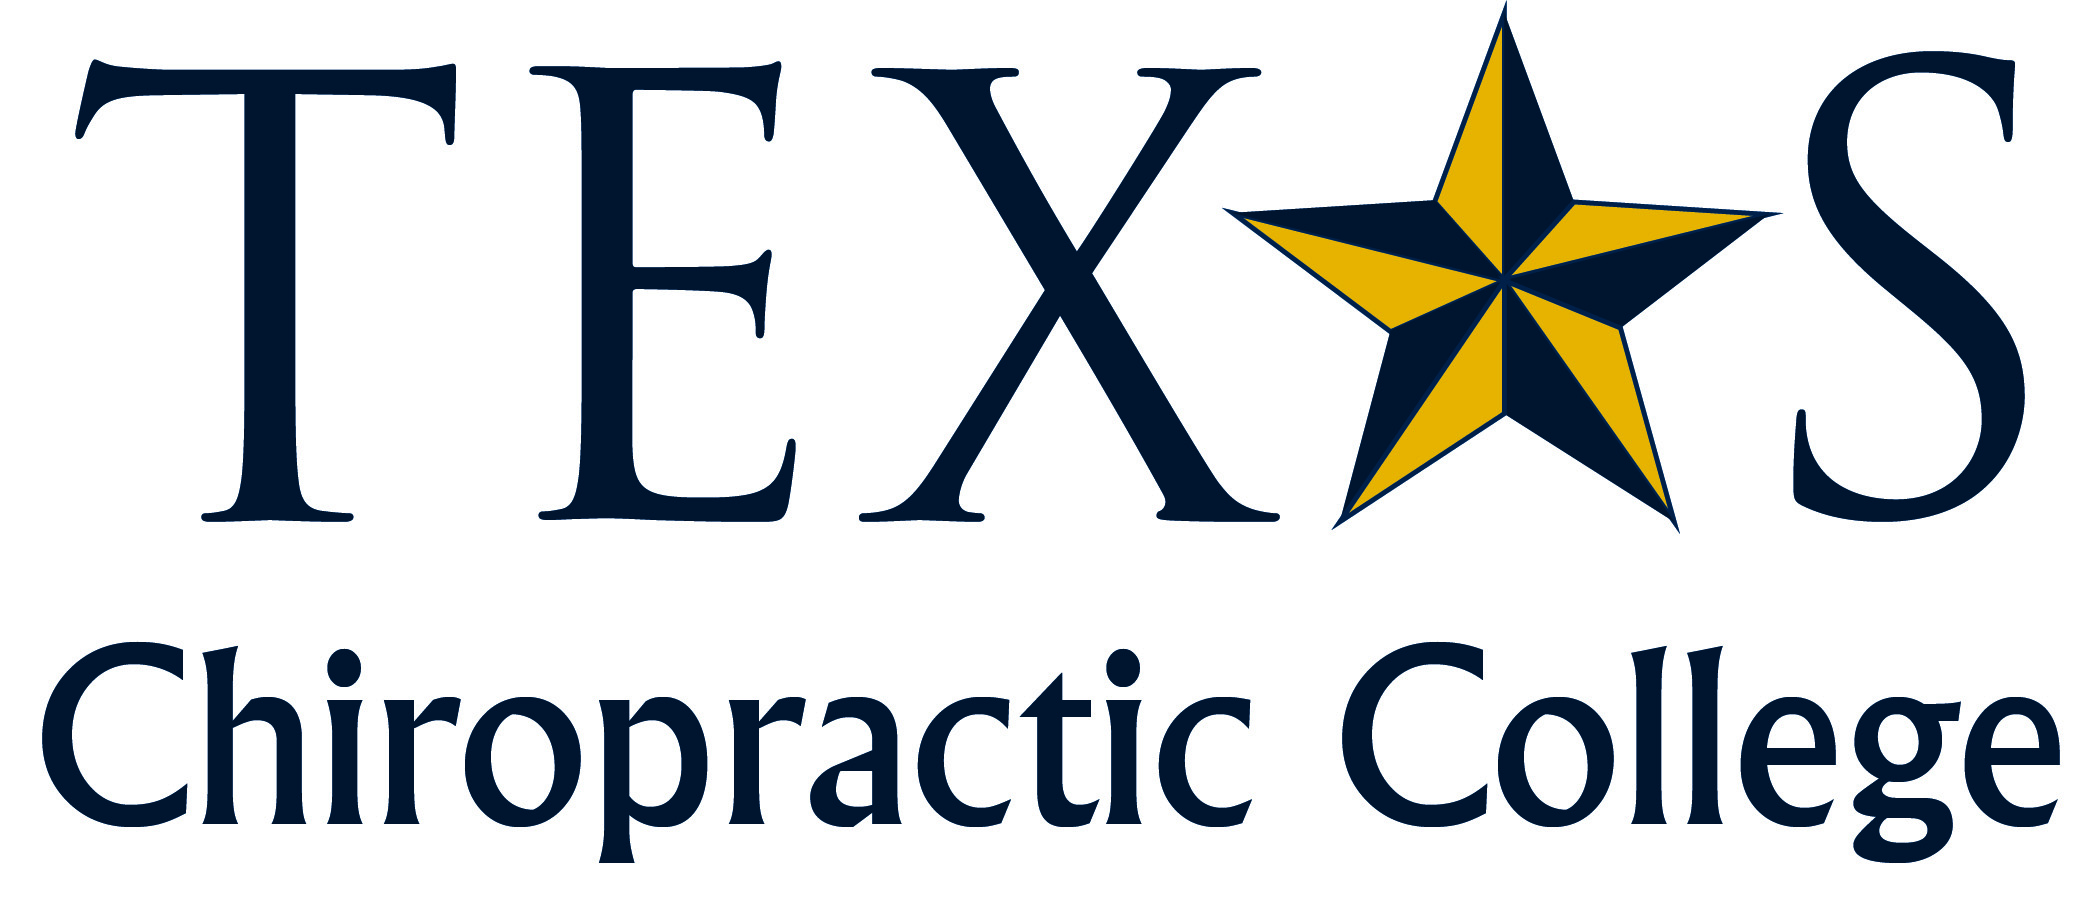 Indiana online chiropractic CE courses